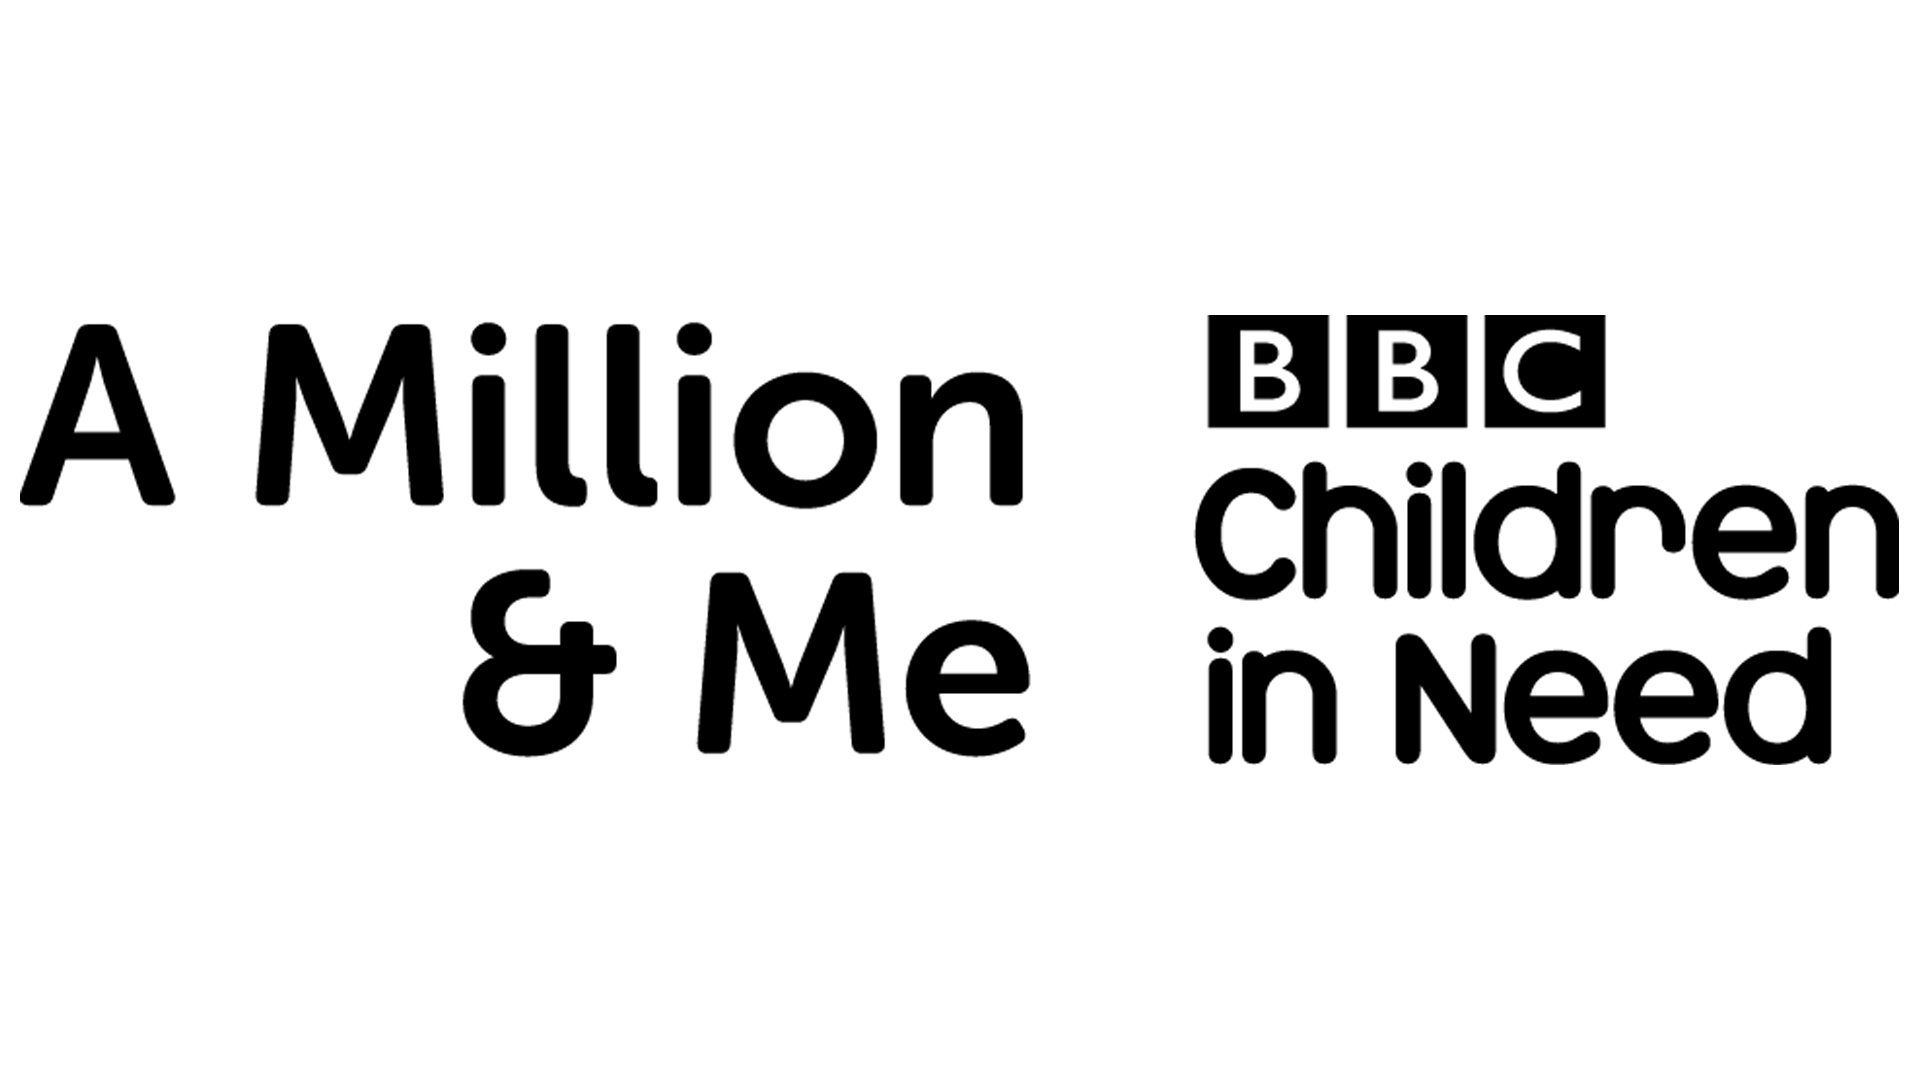 A million and me with BBC children in need logo.